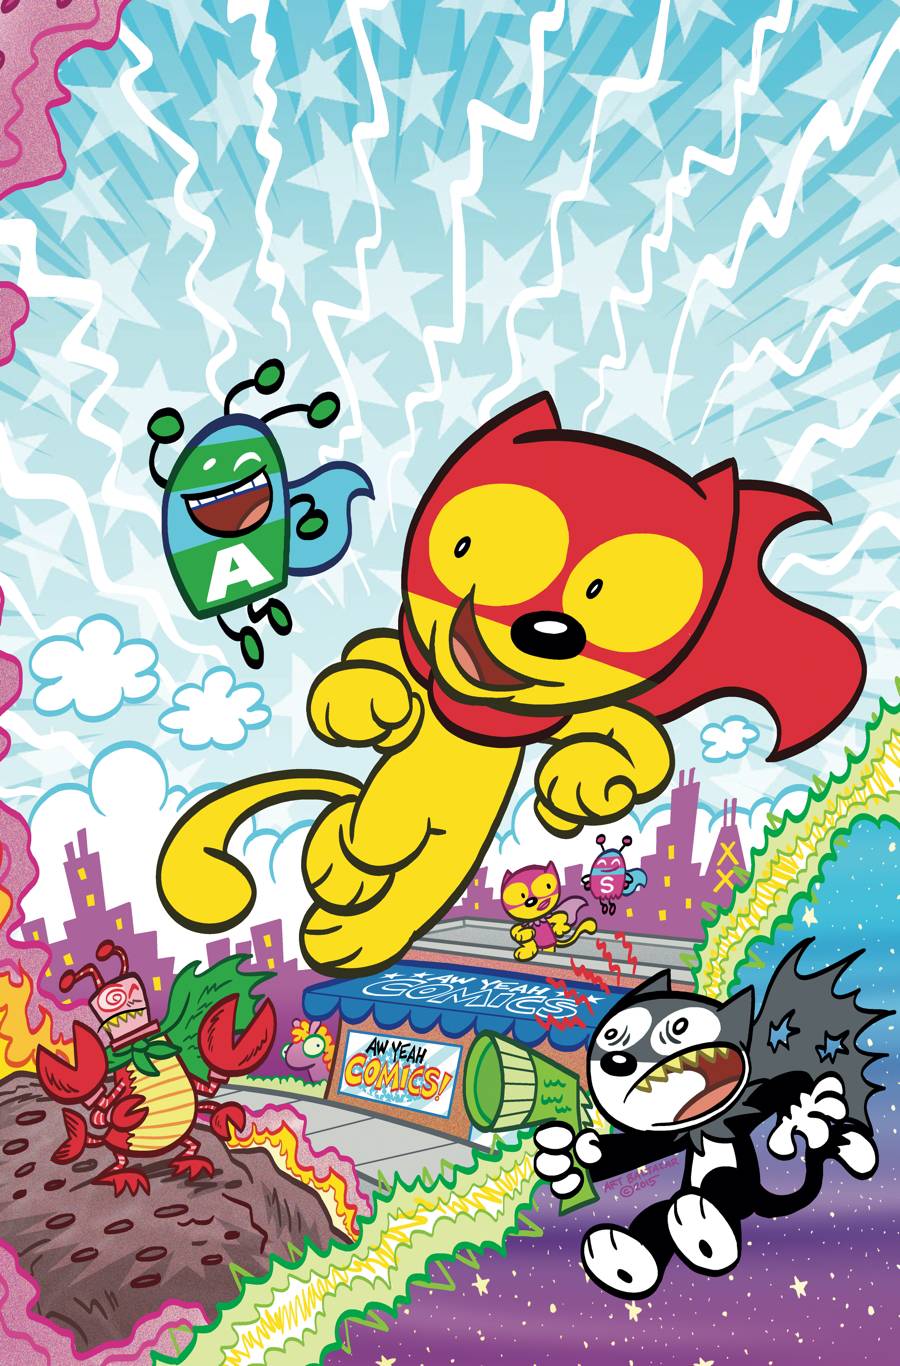 Action cat. Cats Adventure Comic. AW yeah.